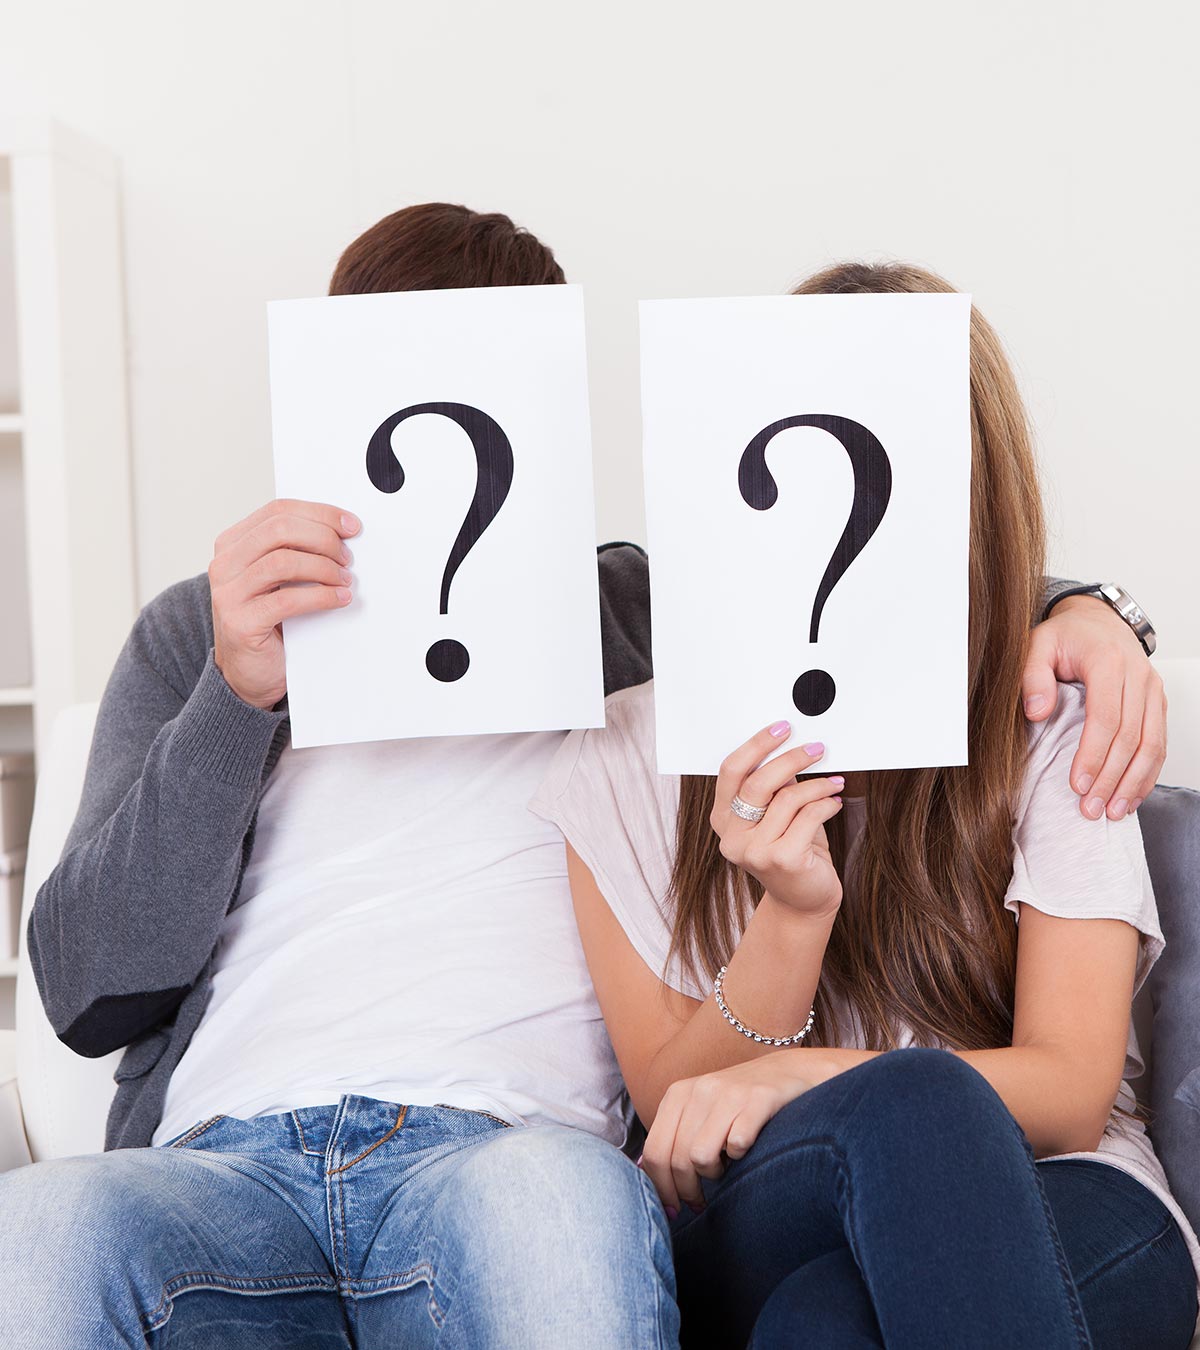 100 Intimate, Funny And Curious Questions To Ask Your Partner